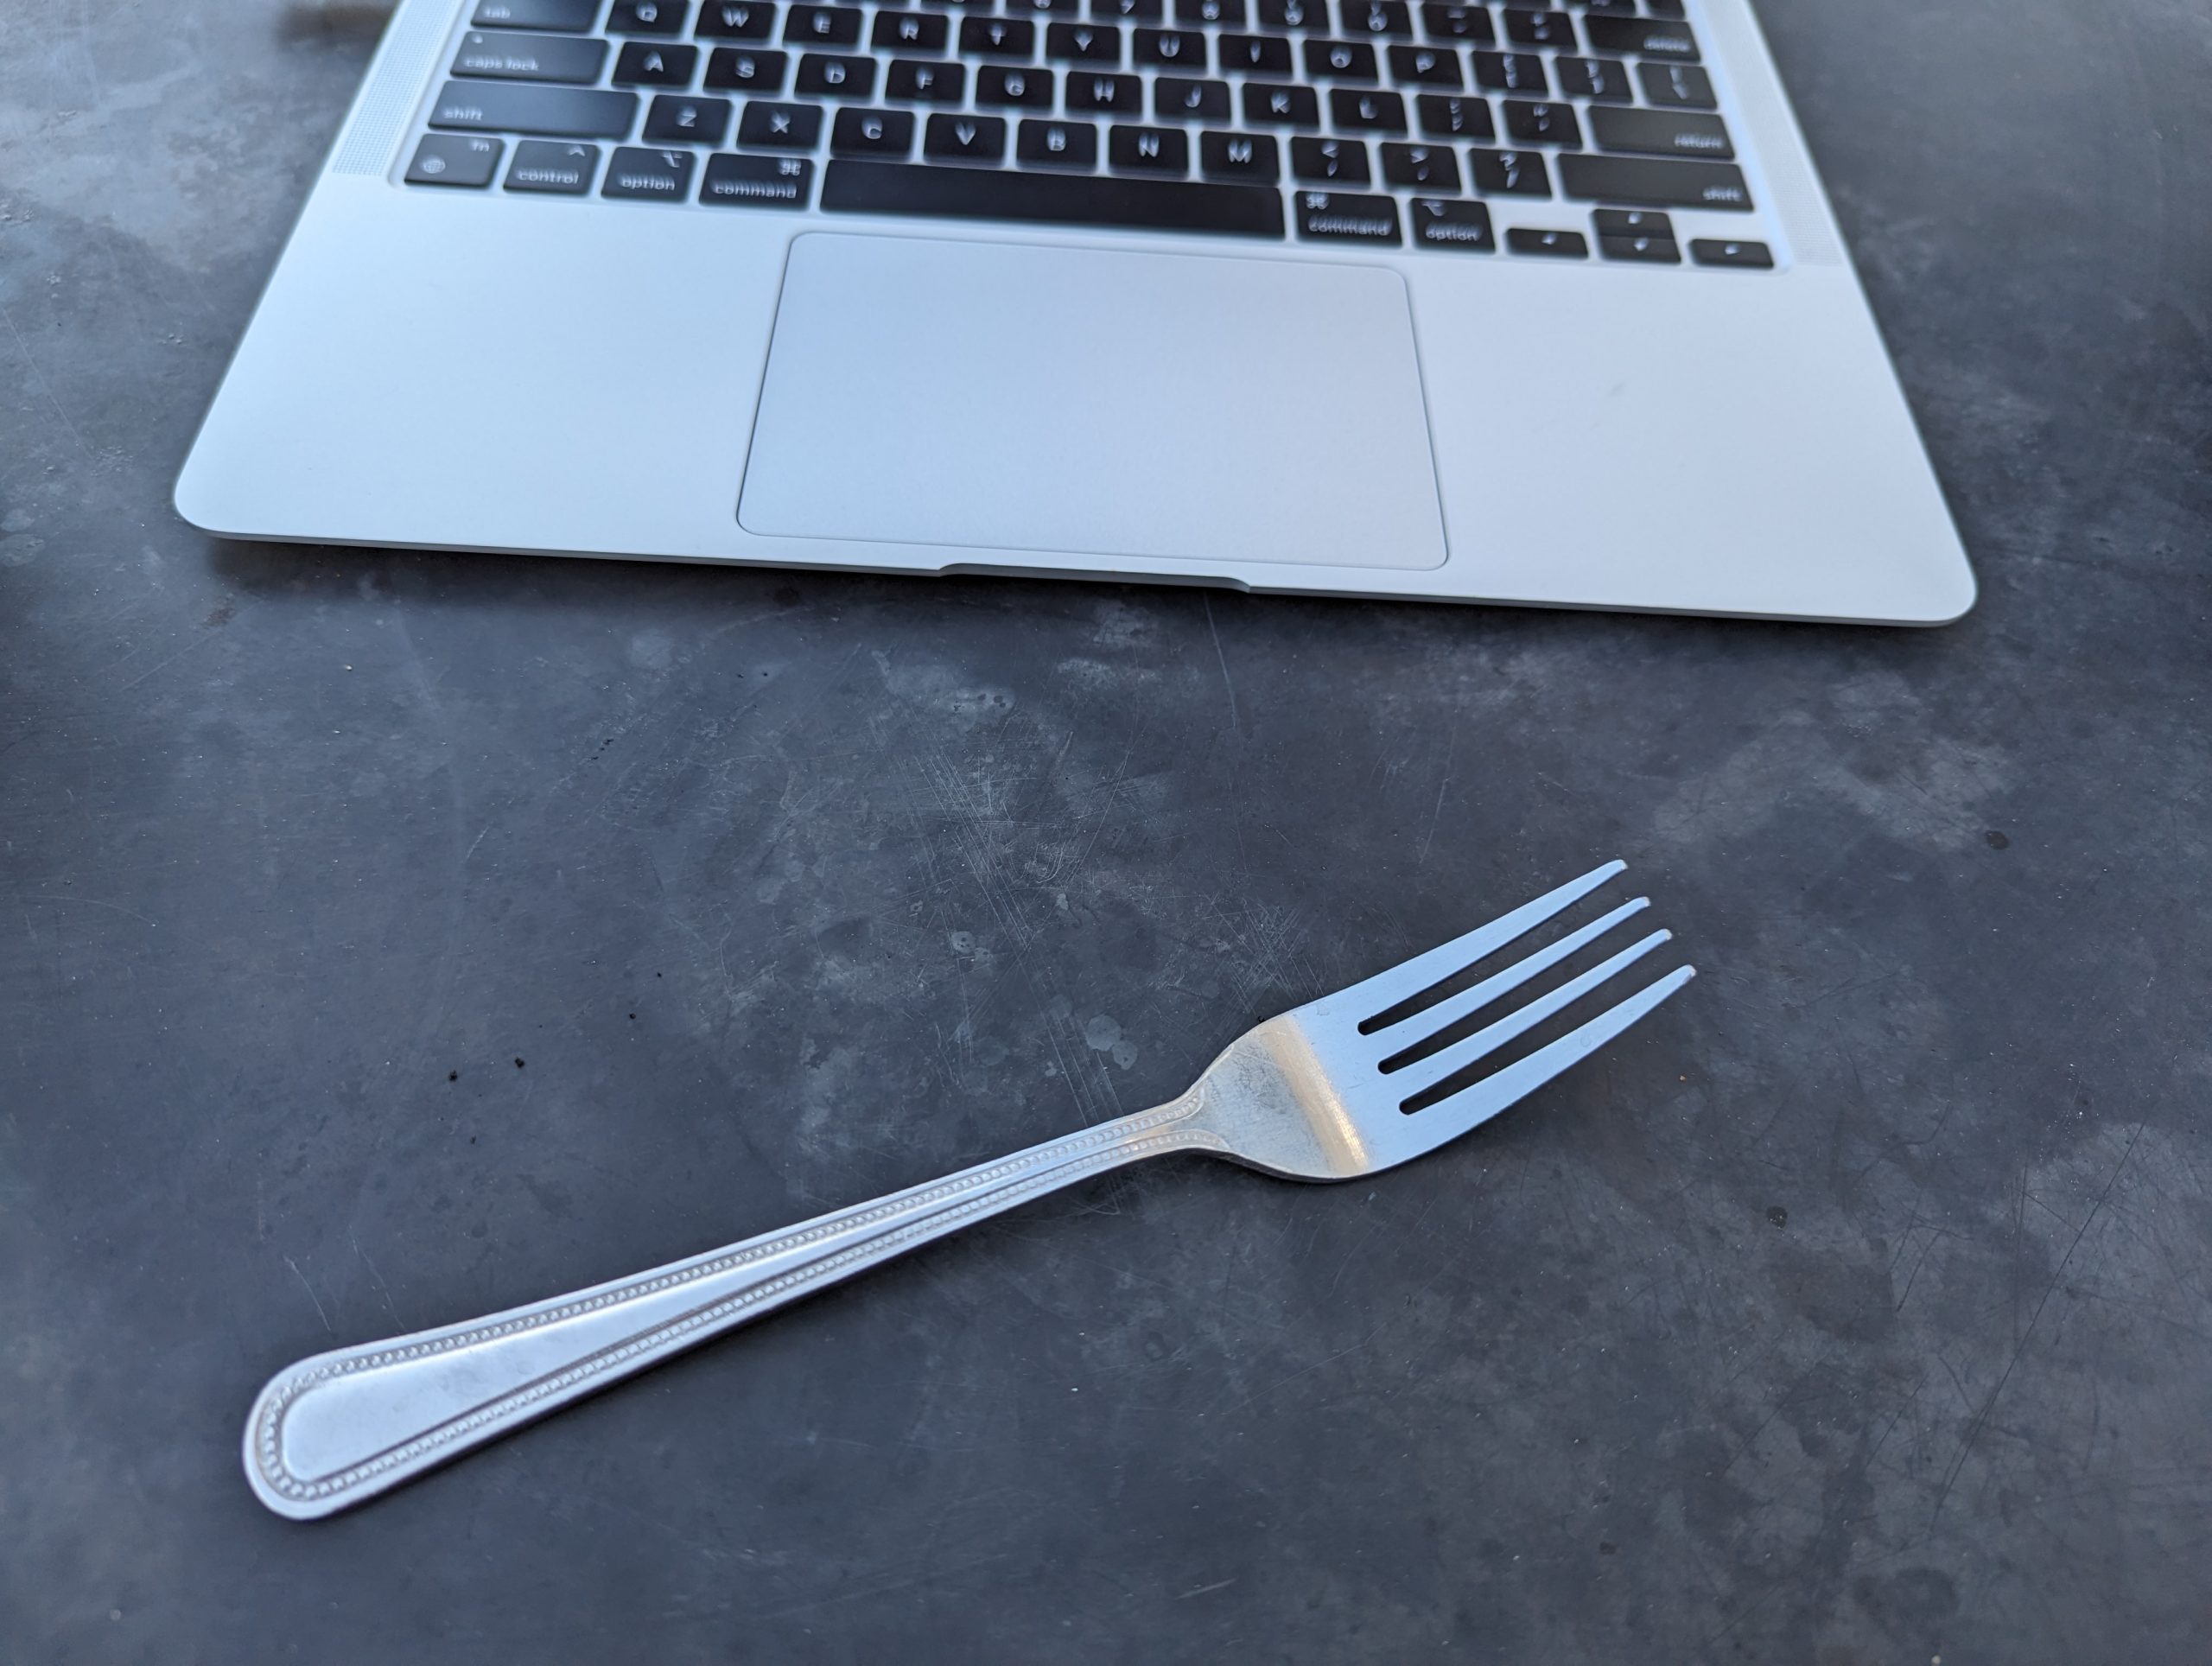 Metal fork in front of an underutilized Mac laptop